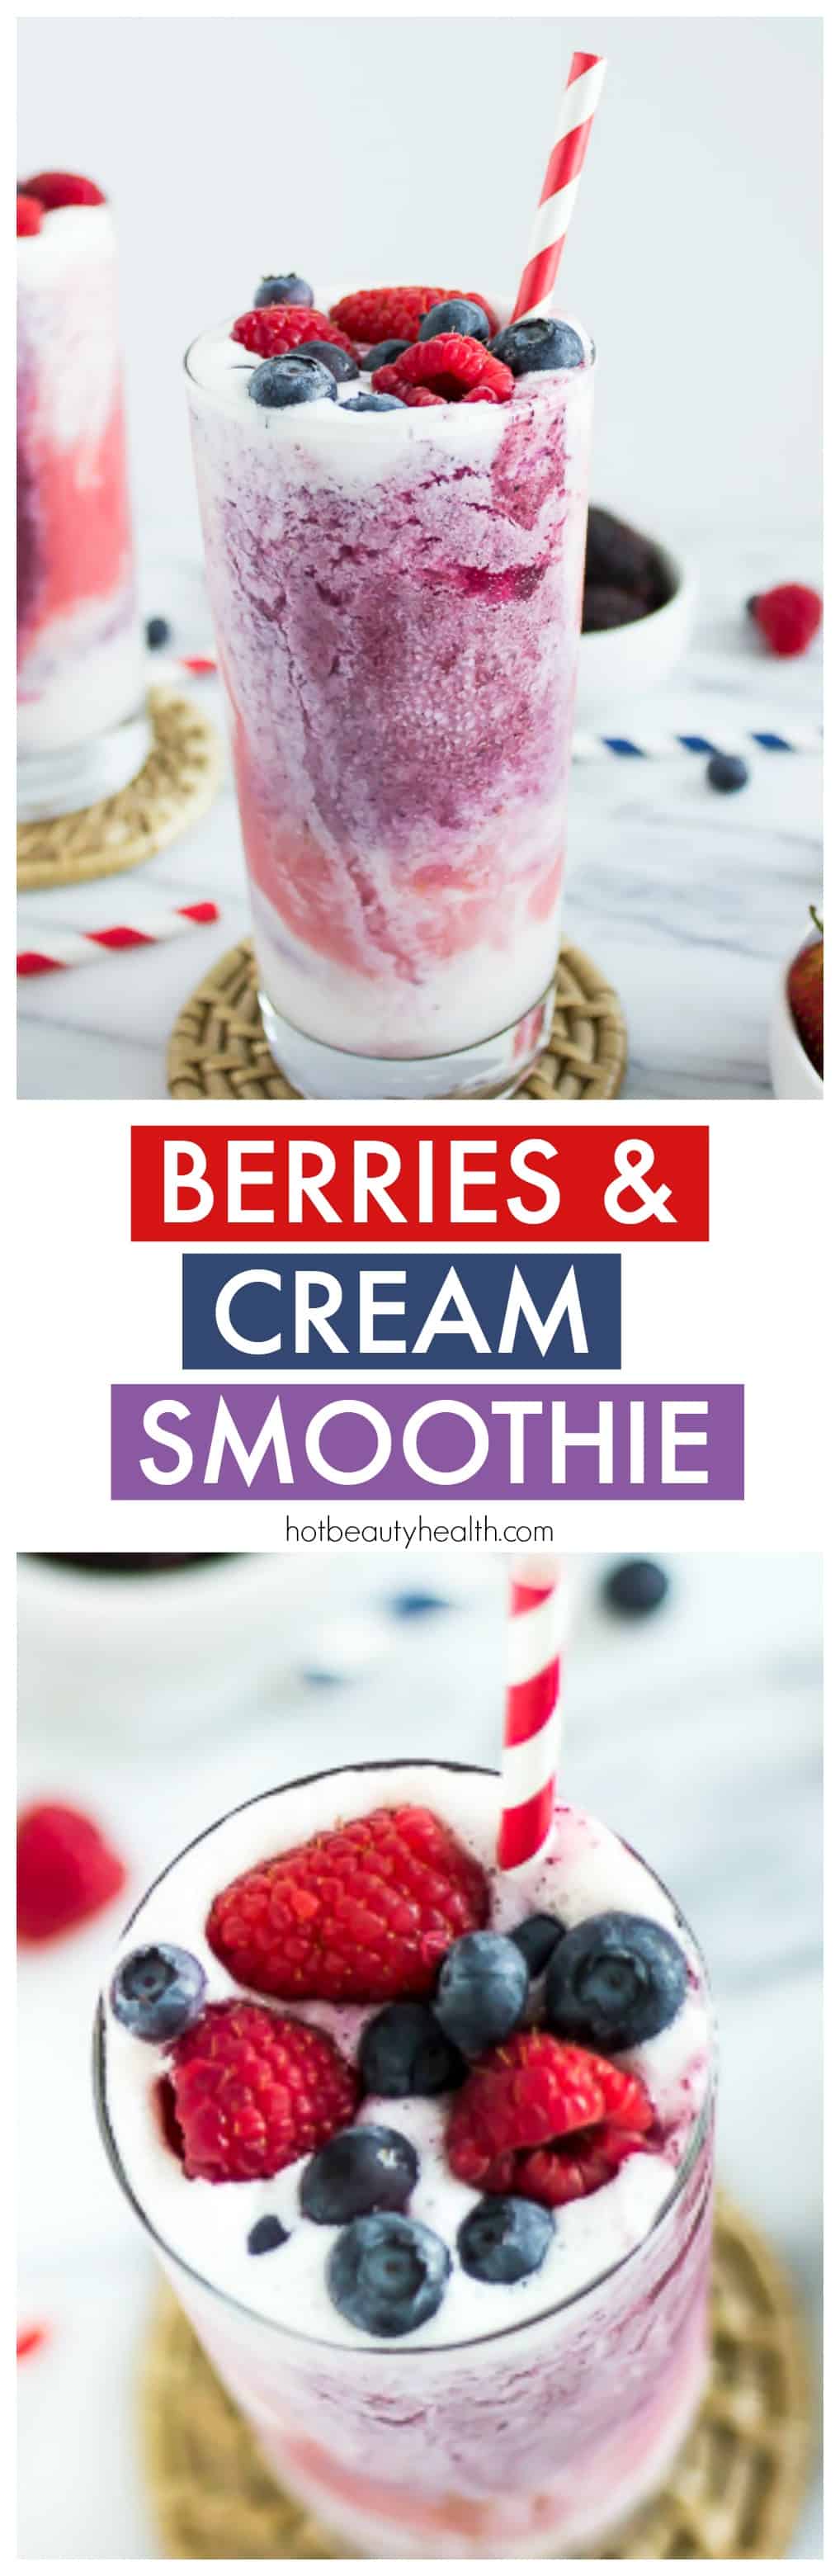 Try this healthy red, white, & blue, berries and cream fruit smoothie recipe. The perfect patriotic, cold berry drink to enjoy all summer long on Memorial Day, 4th of July, and Labor Day. Made with apple juice, greek yogurt, skim milk, and tons of berries!